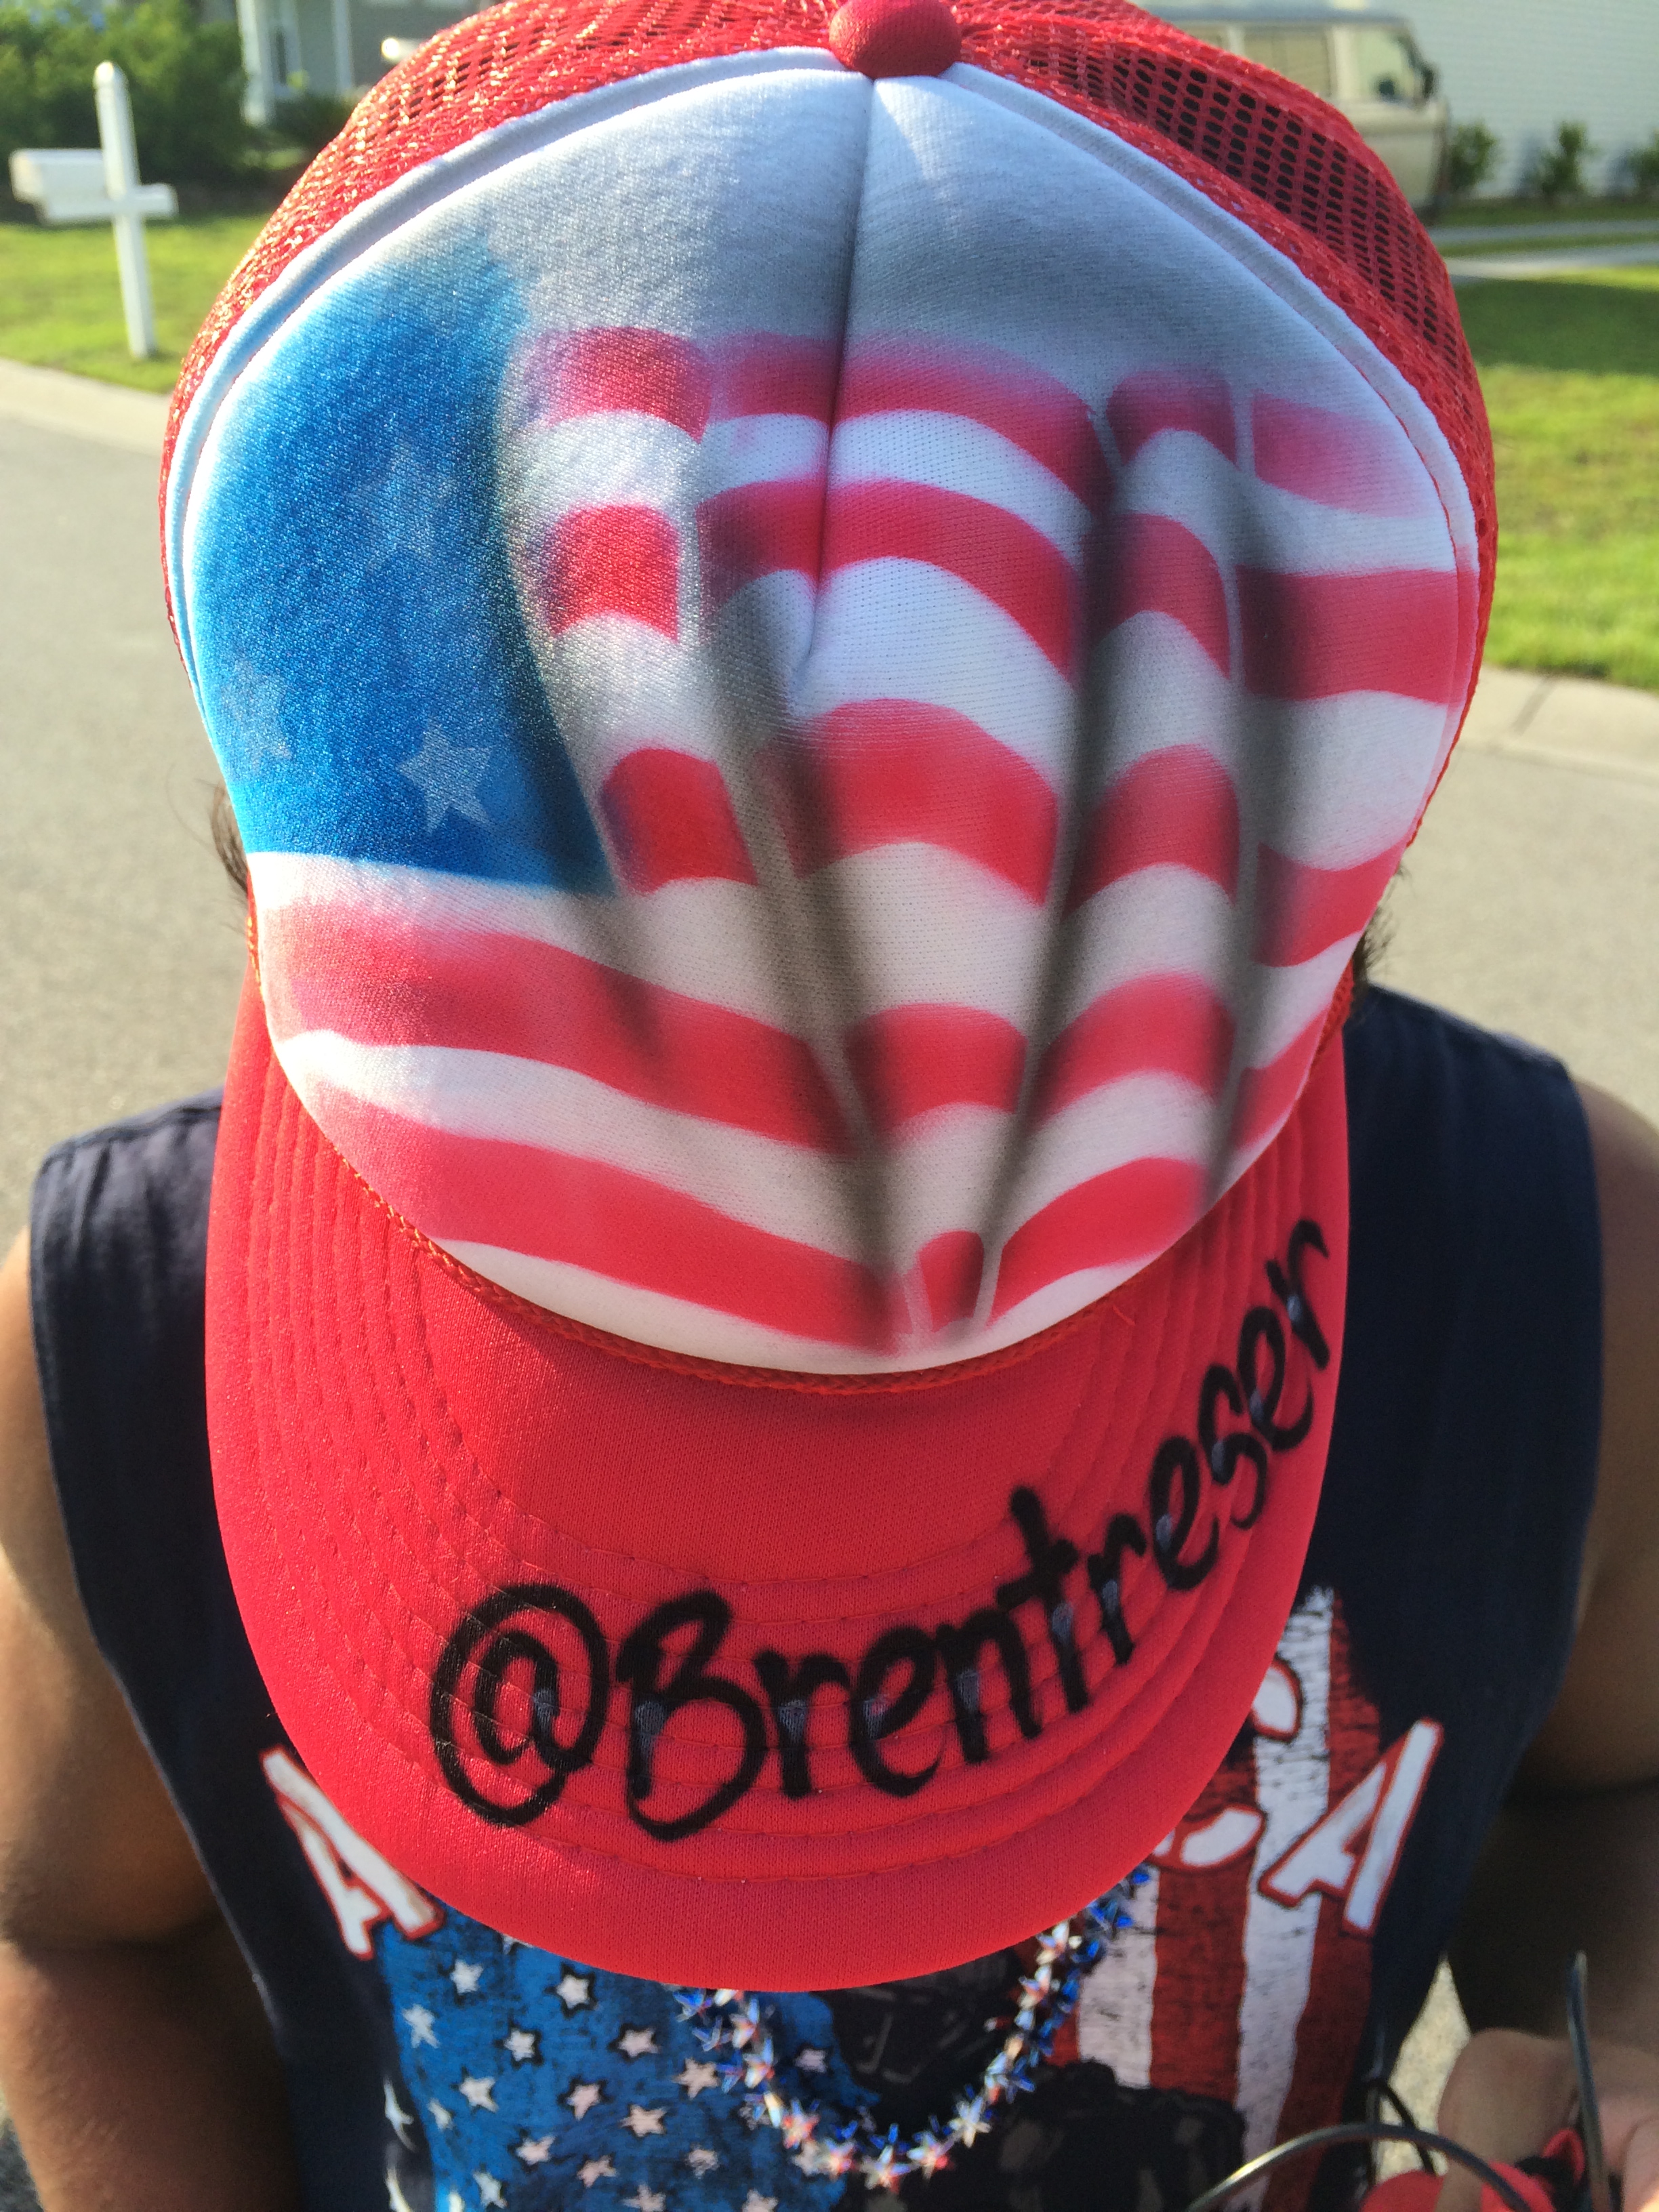 What do you think about the hat I had custom made for the Fourth of July?